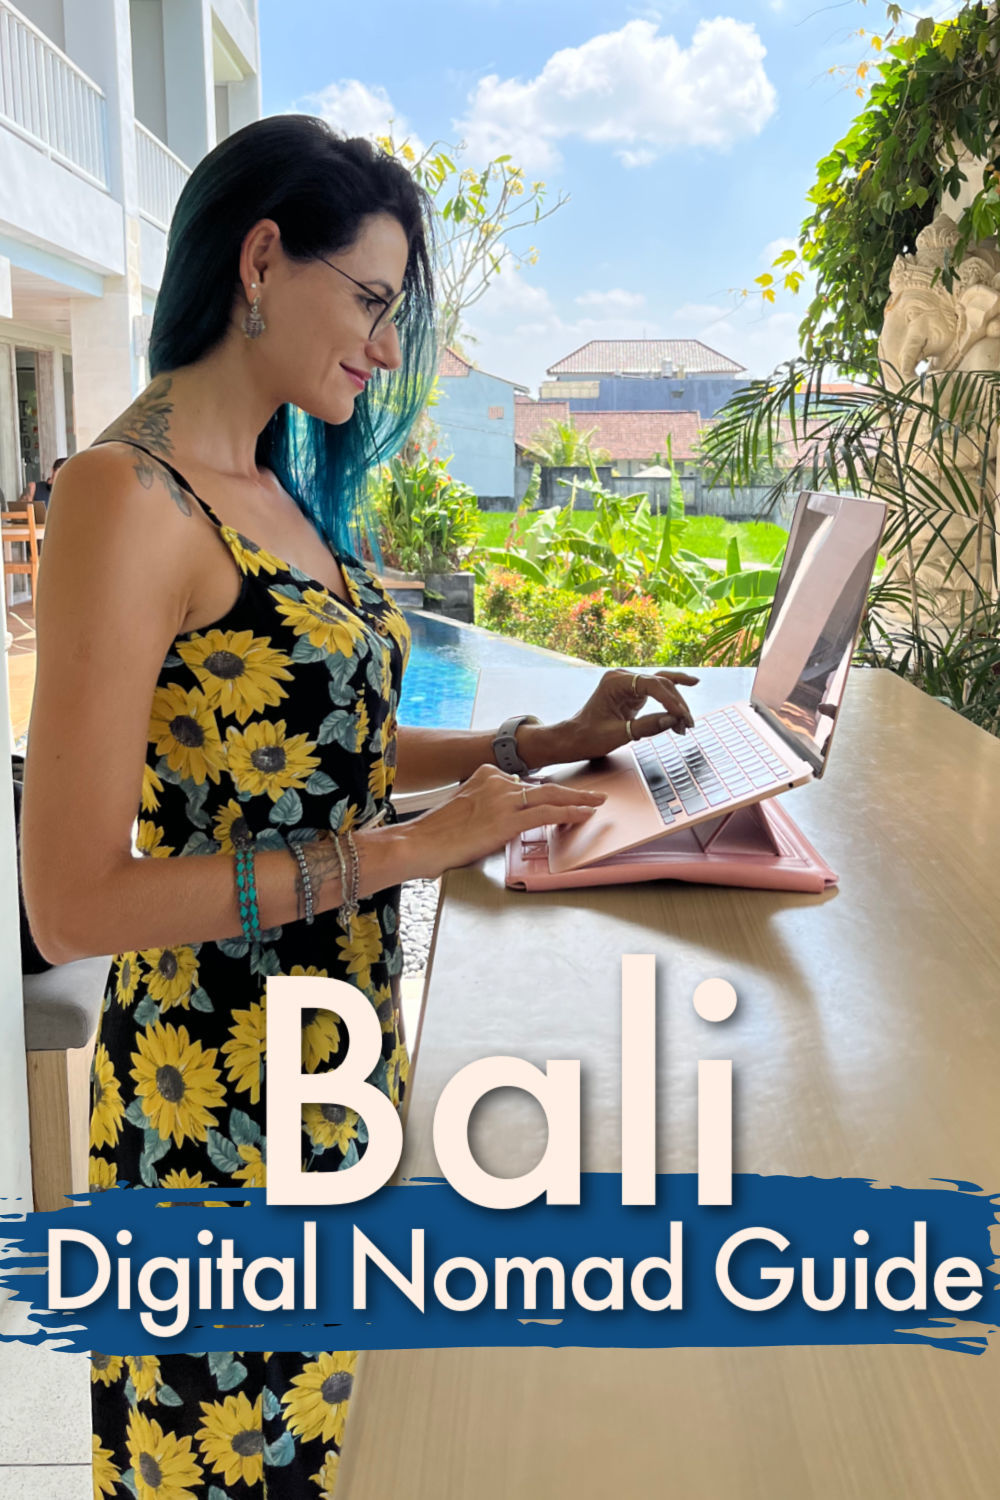 The good and the bad of Bali Digital Nomad Life and all you need to know about living in Bali as a remote worker, digital nomad or long-term traveler.A guide to where to stay in Bali as a digital nomad and why most travelers choose Canggu and Ubud. The best coworking spaces in Bali, coworking in Canggu and Ubud, and the best colivings on the island.Tips on how to get around Bali, motorbike rental, internet, food, culture, and living costs as a digital nomad in Bali.